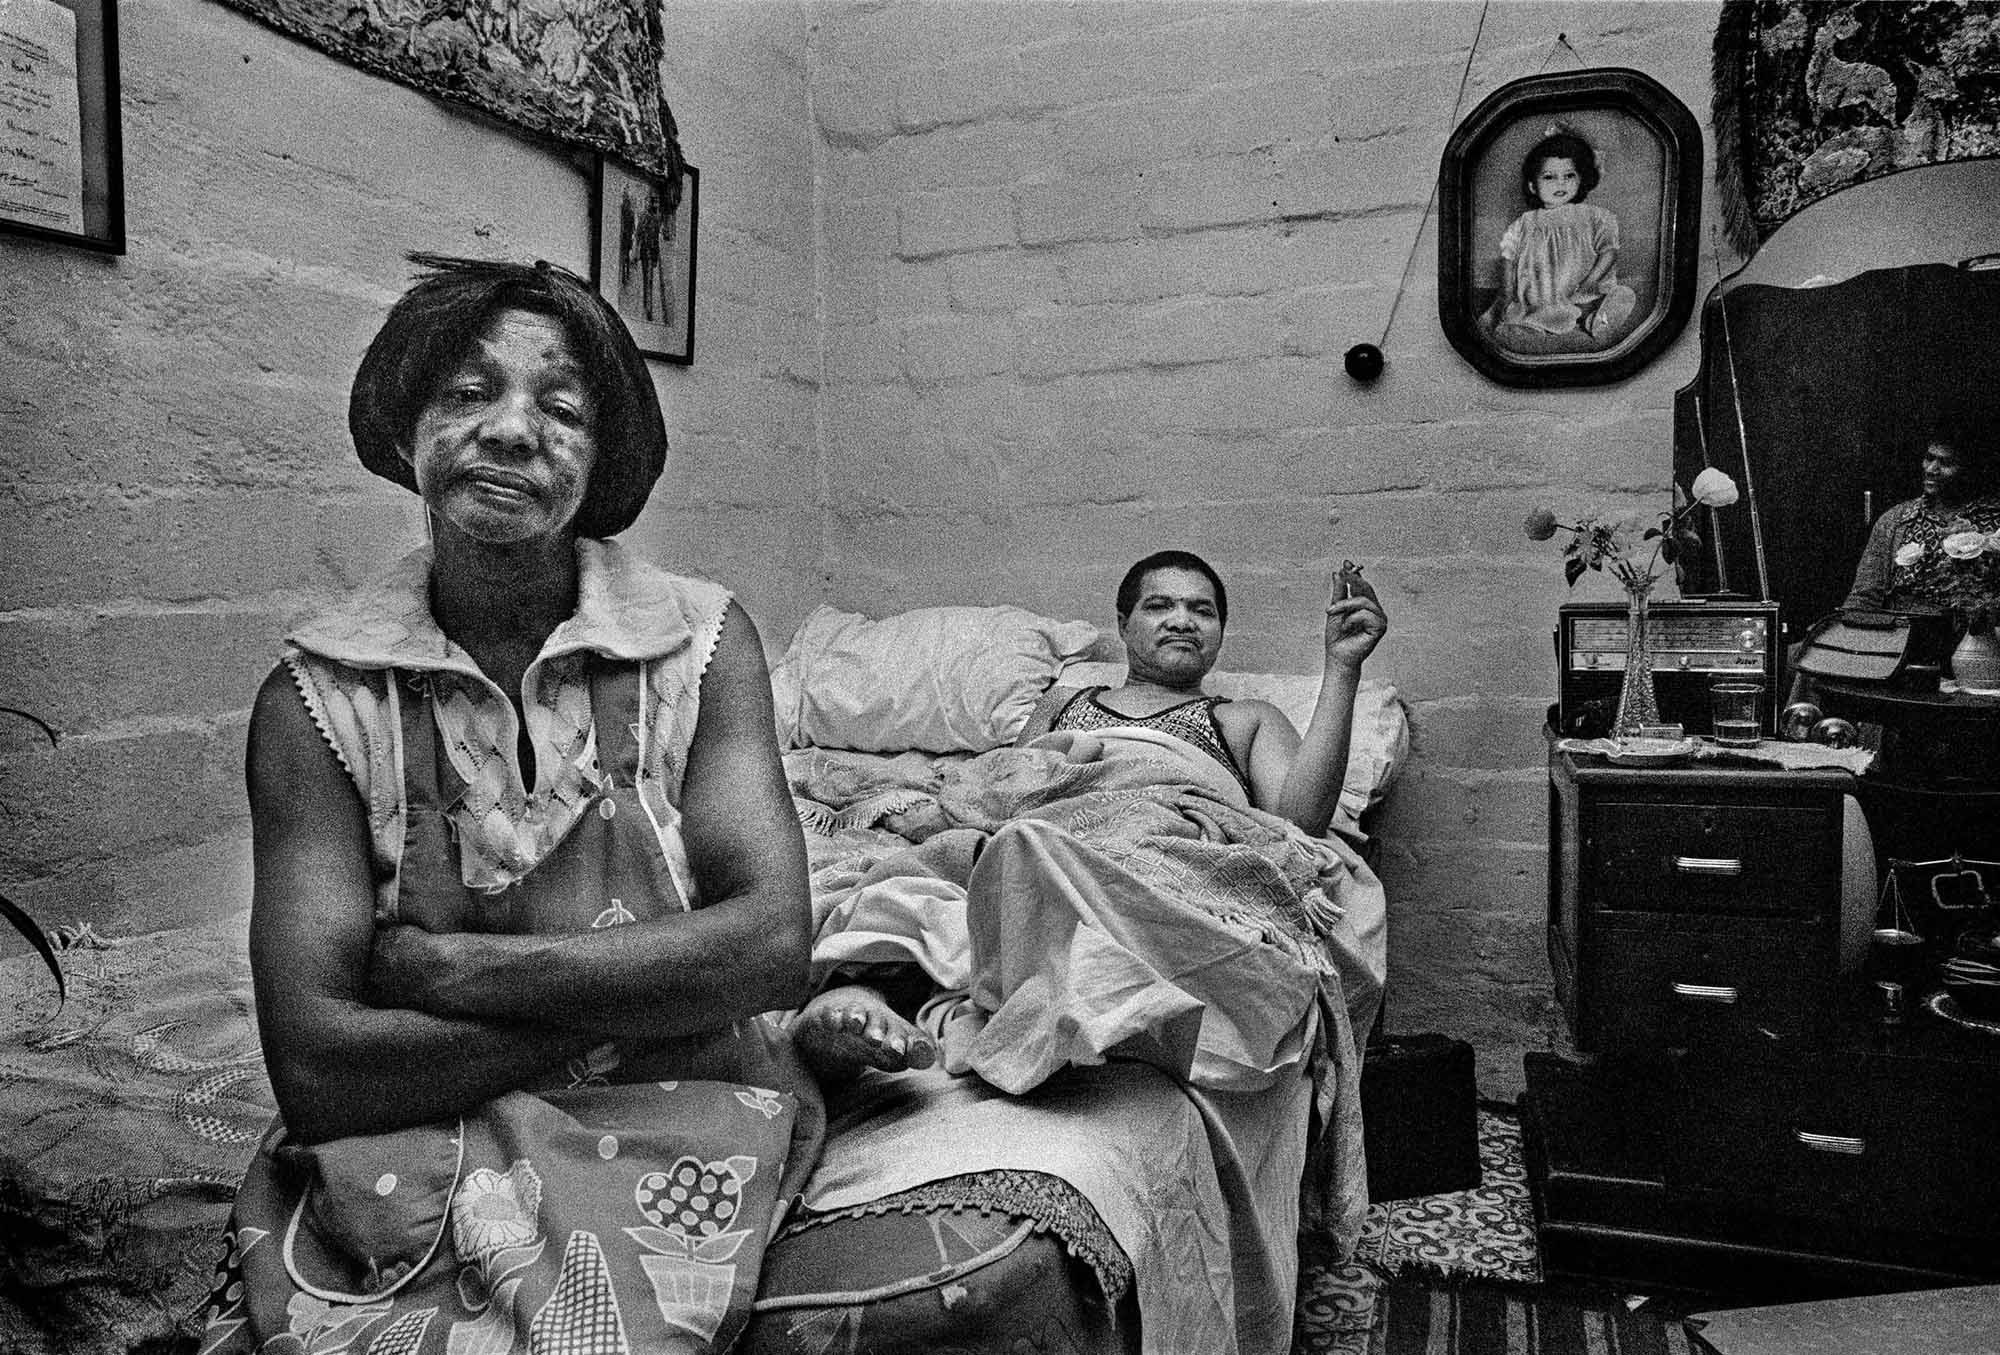 South Africa in the 1970s - Photographs by Steve Bloom